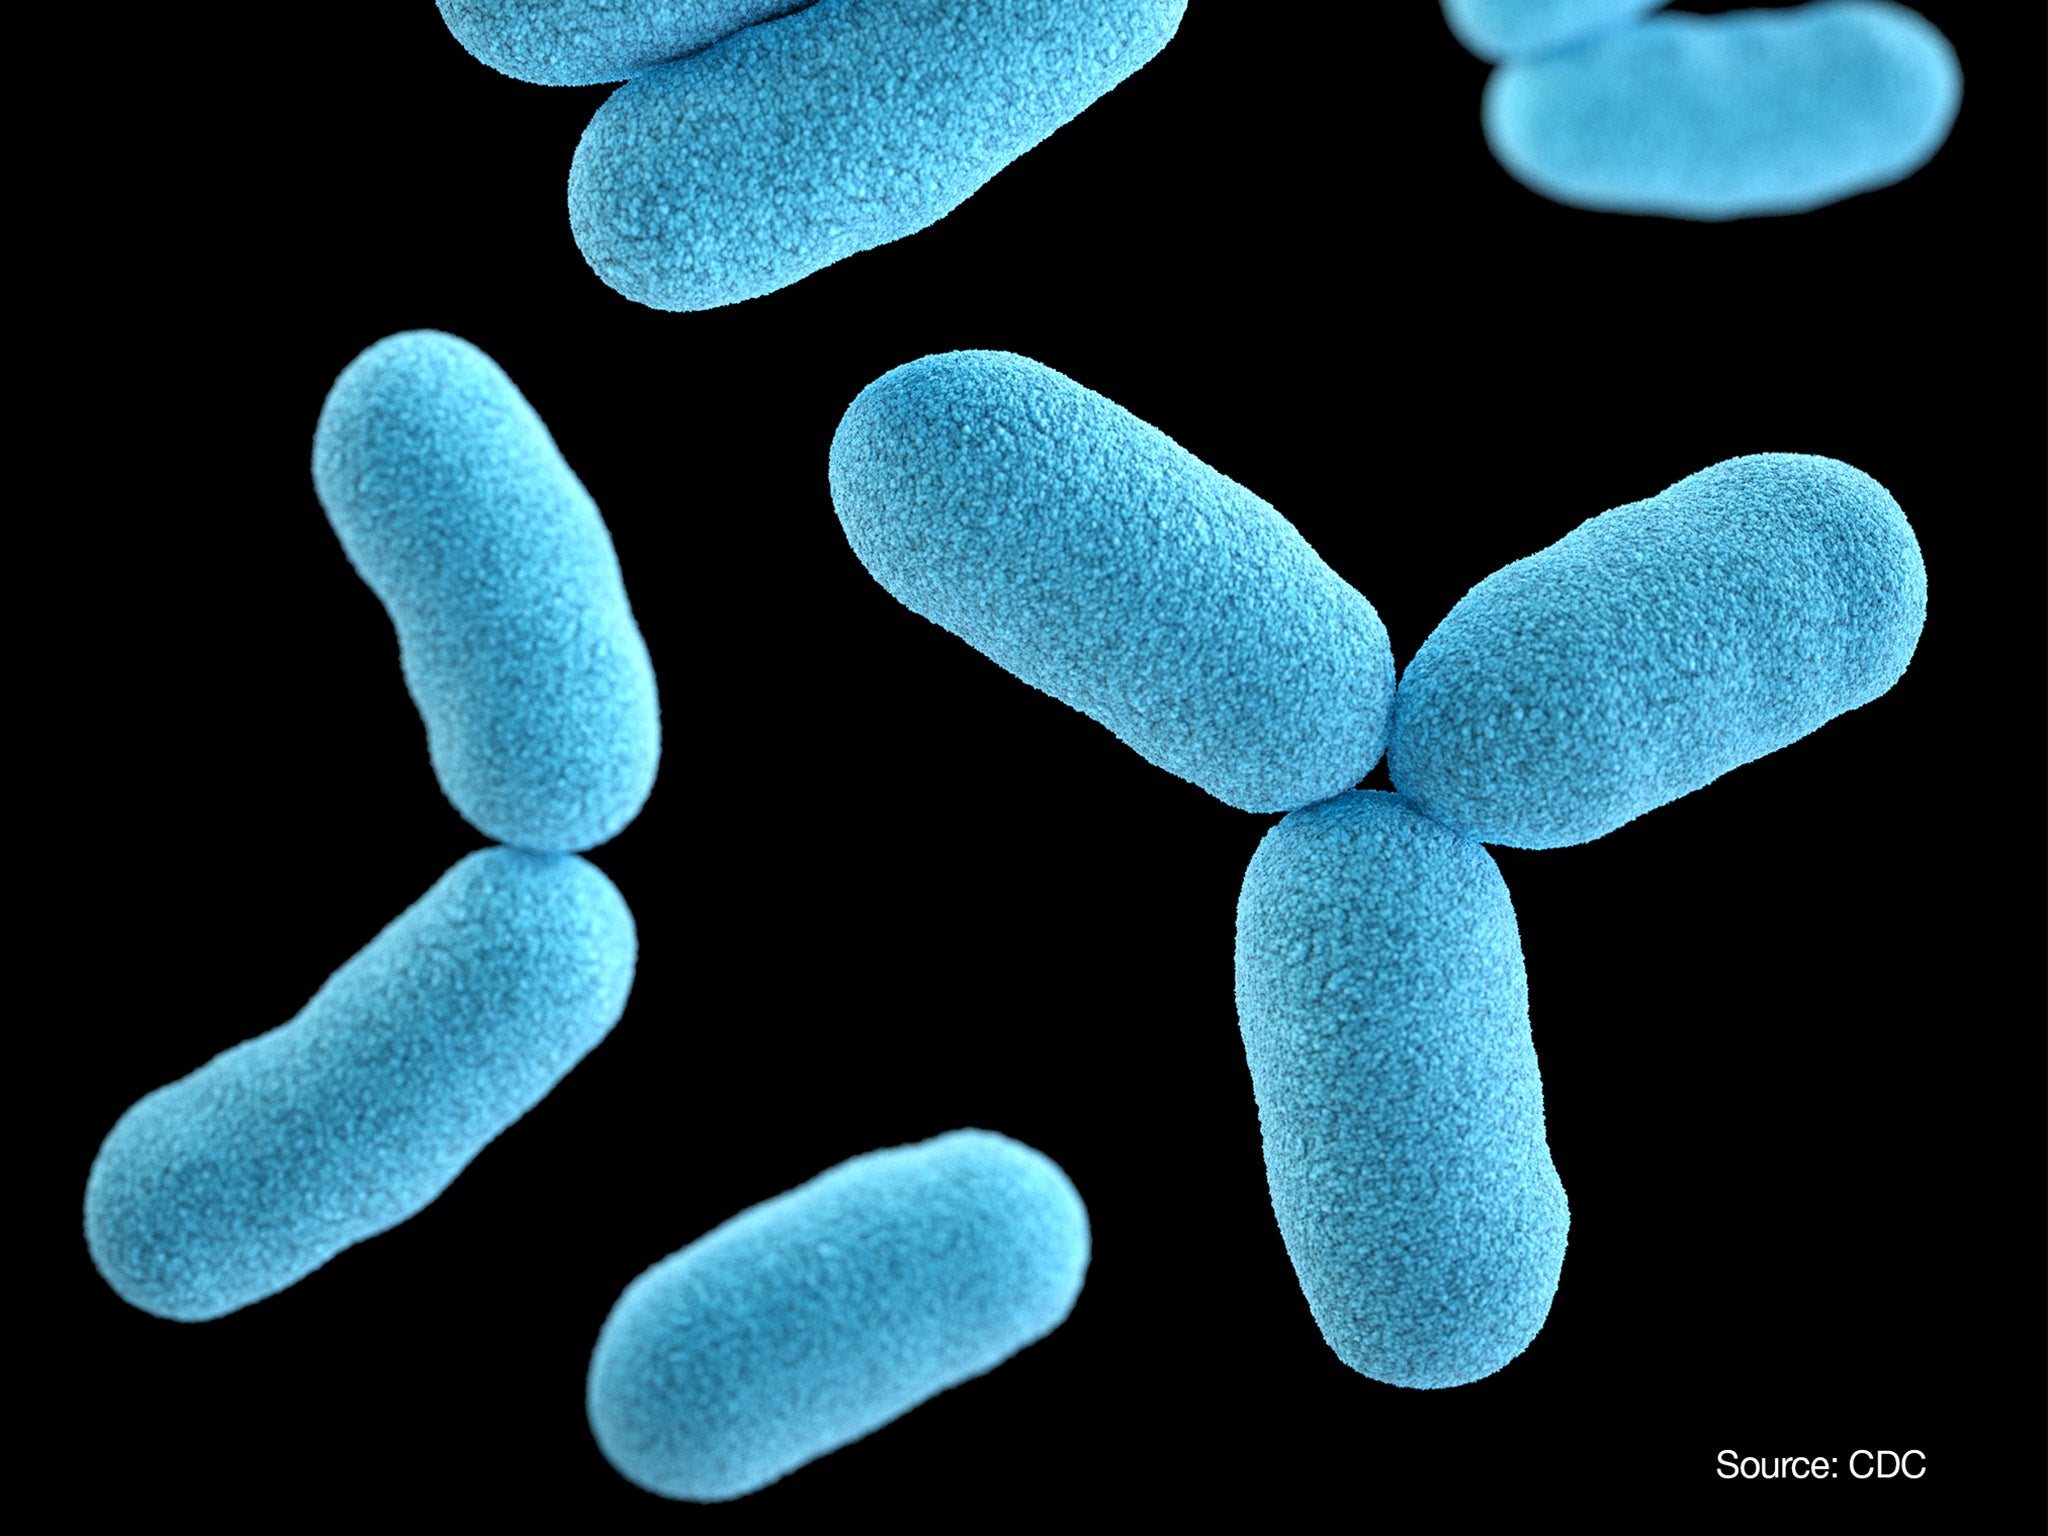 A three-dimensional, computer-generated illustration of a group of Corynebacterium diphtheriae bacteria, based upon scanning electron microscopic imagery